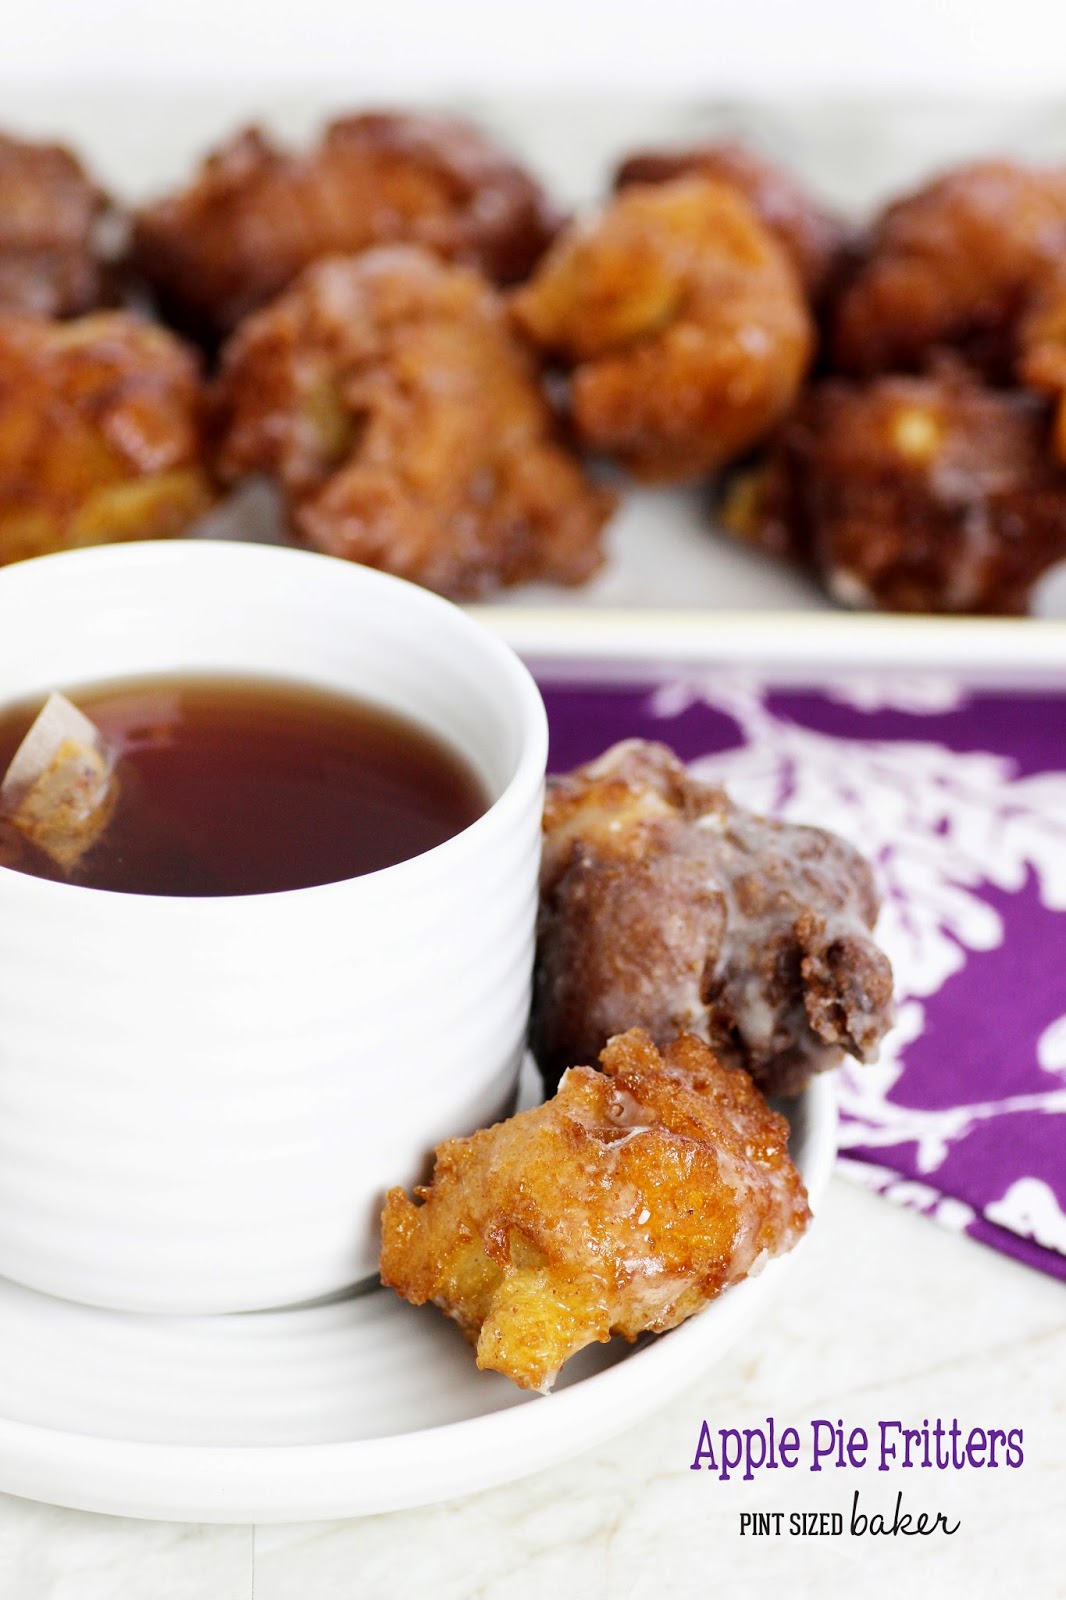 #BakeThisHolidaySpecial - Make some homemade Apple Pie Fritters. There's more than enough to feed your hungry crowd!